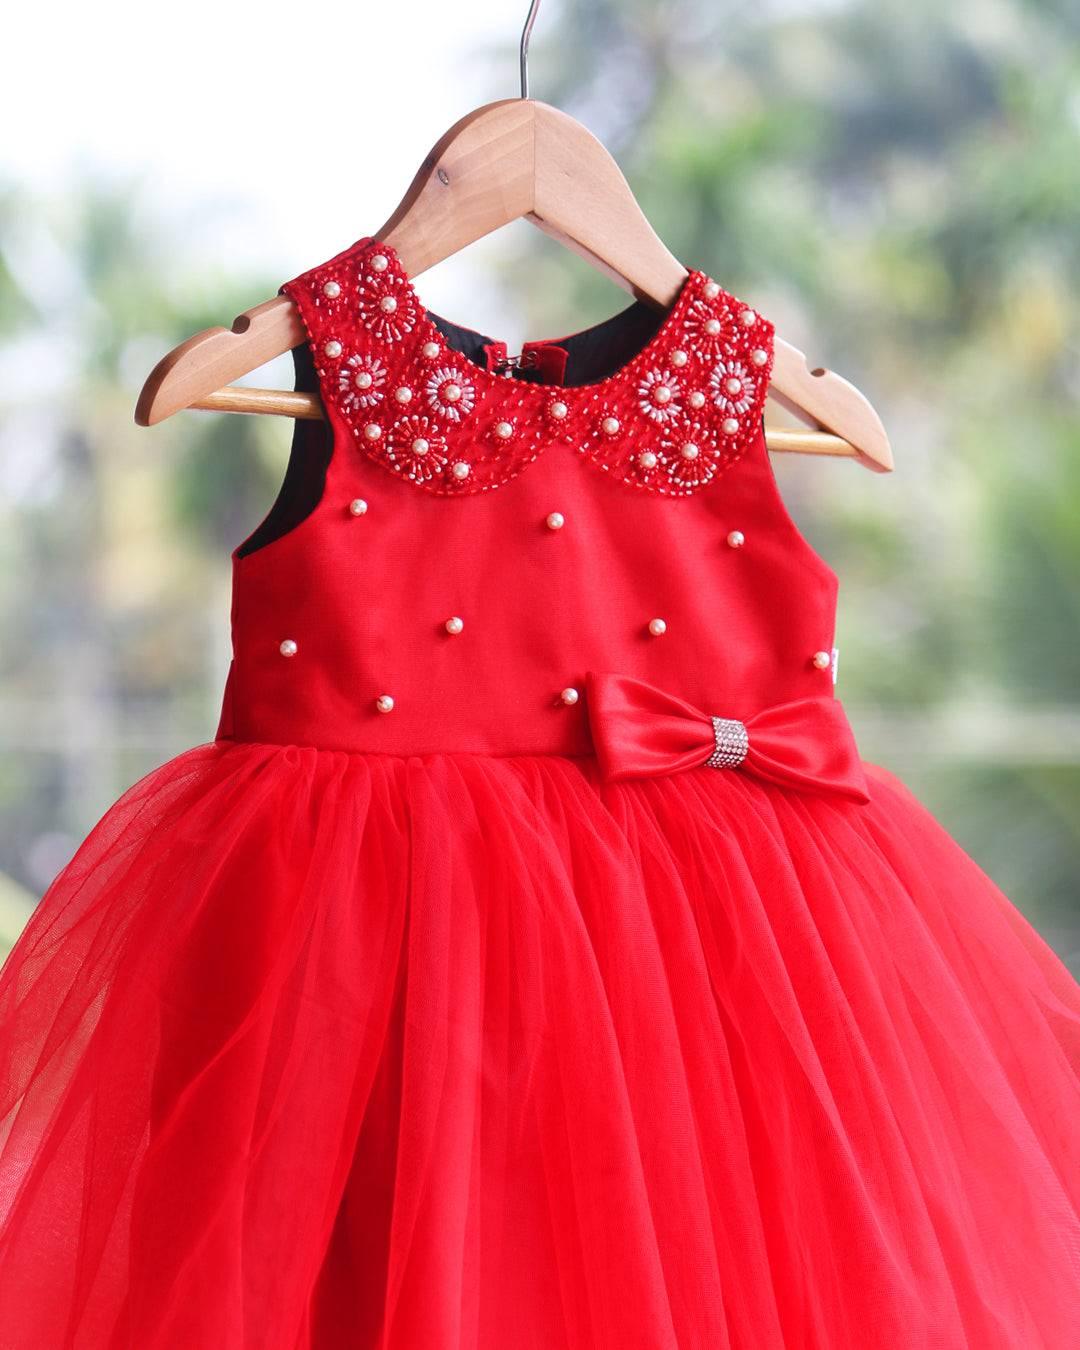 Red Colour Hand Embroidery Knee-Length Frock.
Material: Red colour soft quality nylon net fabric with premium matching ultra satin material is used for glossy feel.Yoke portion of the frock is designed with Whi